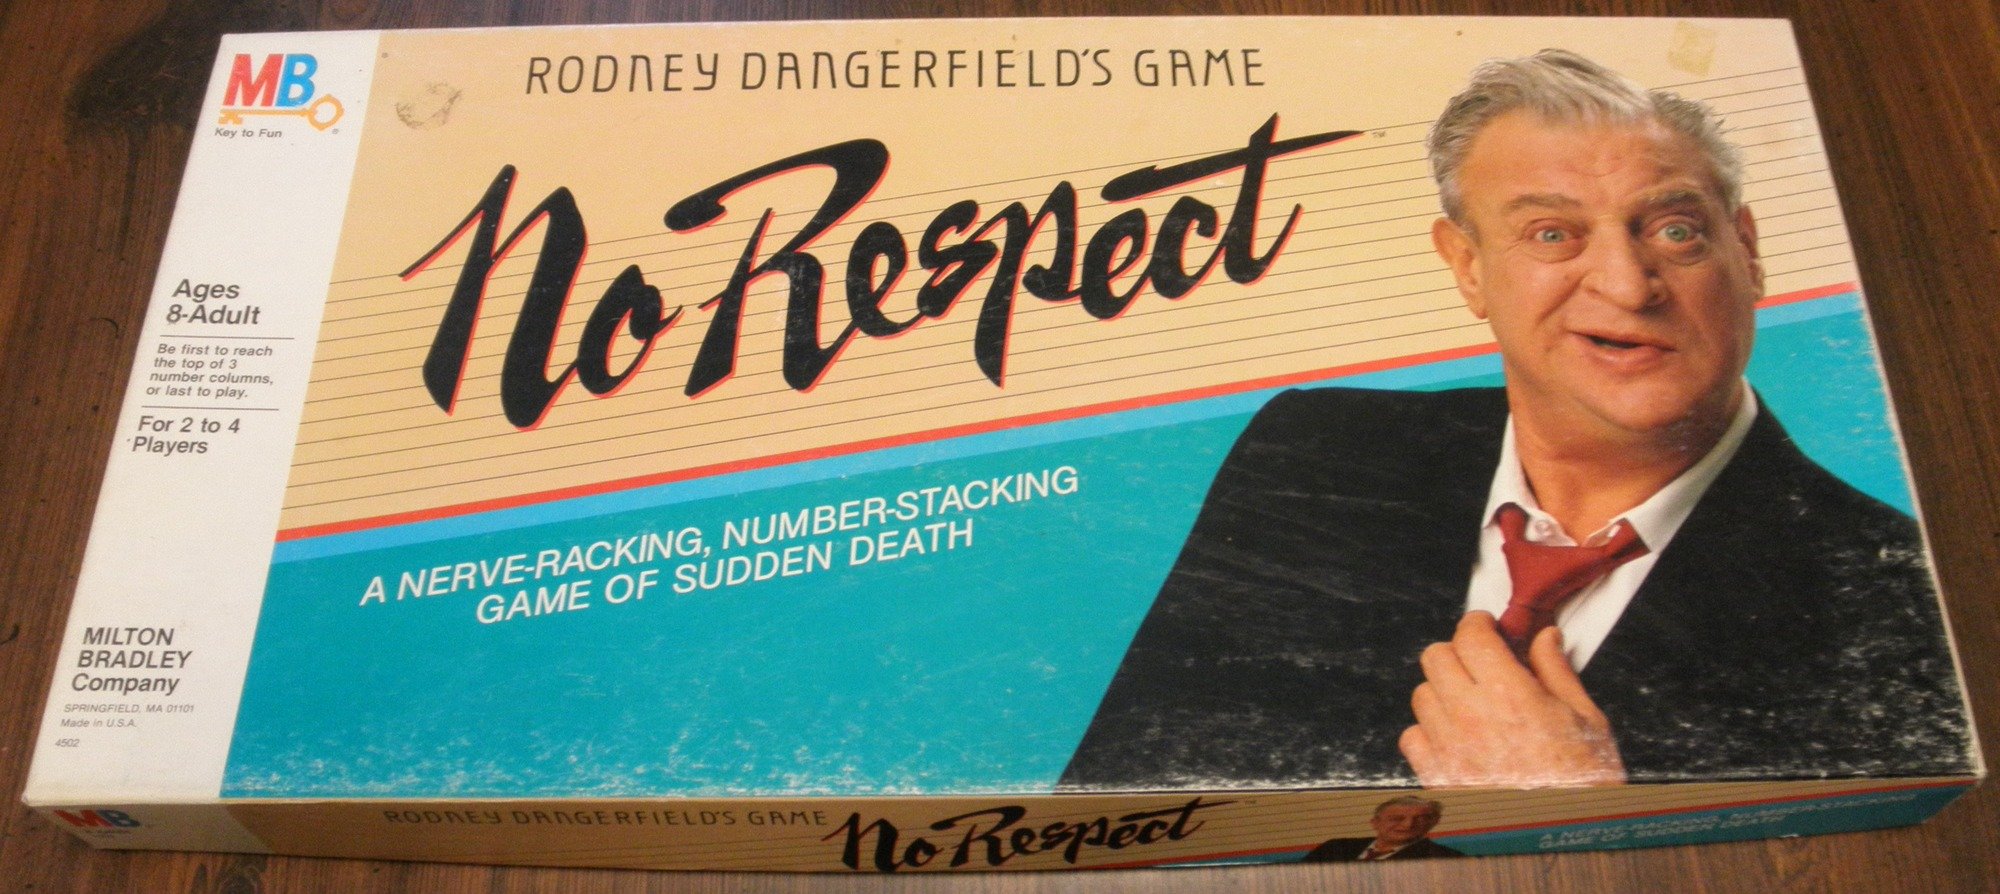 Rodney Dangerfield’s Game No Respect Board Game Review